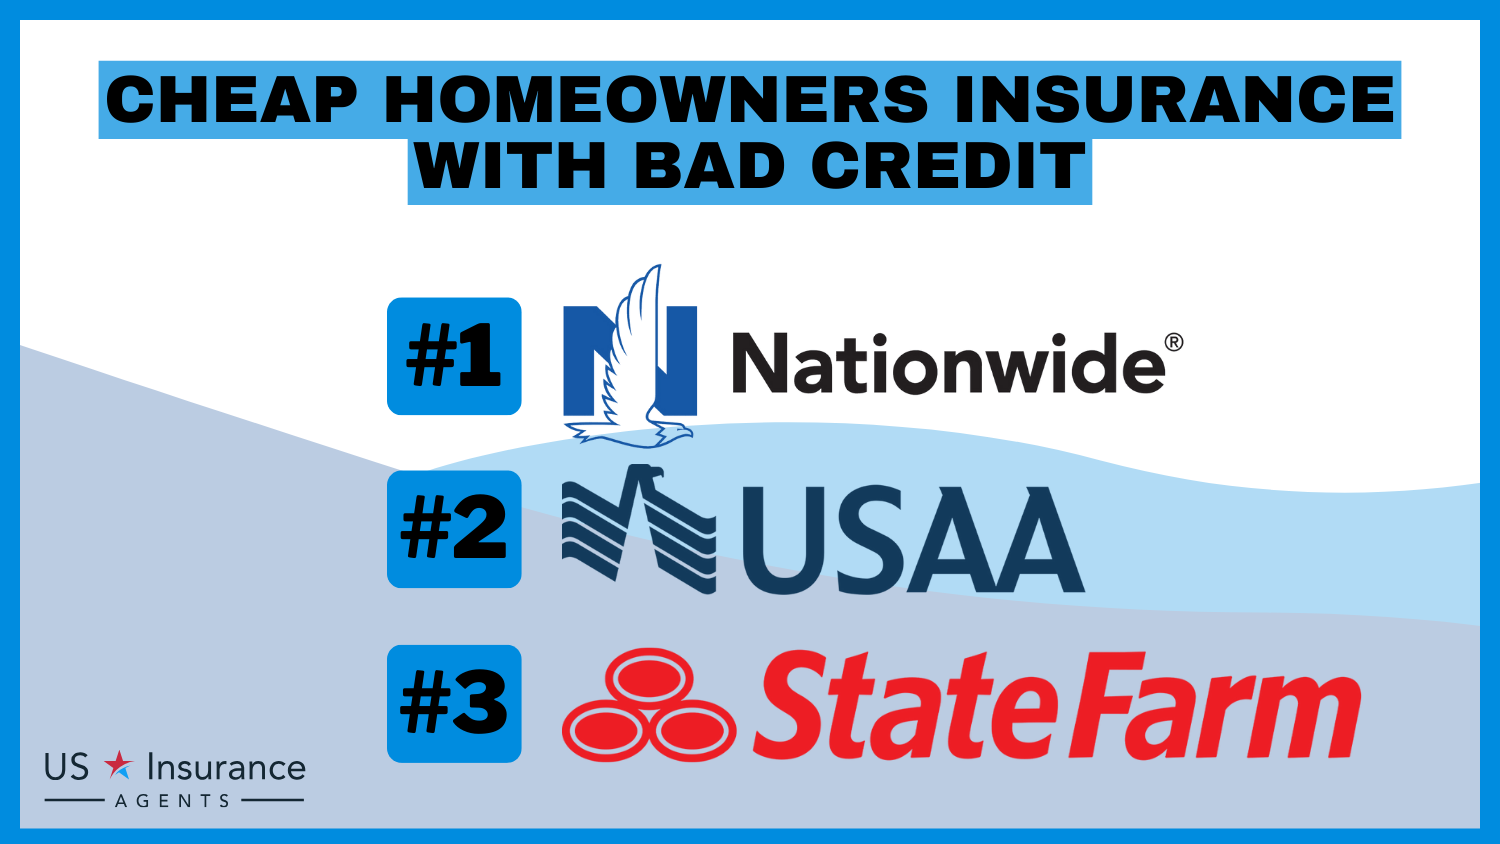 Nationwide, USAA, State Farm: Cheap Homeowners Insurance With Bad Credit